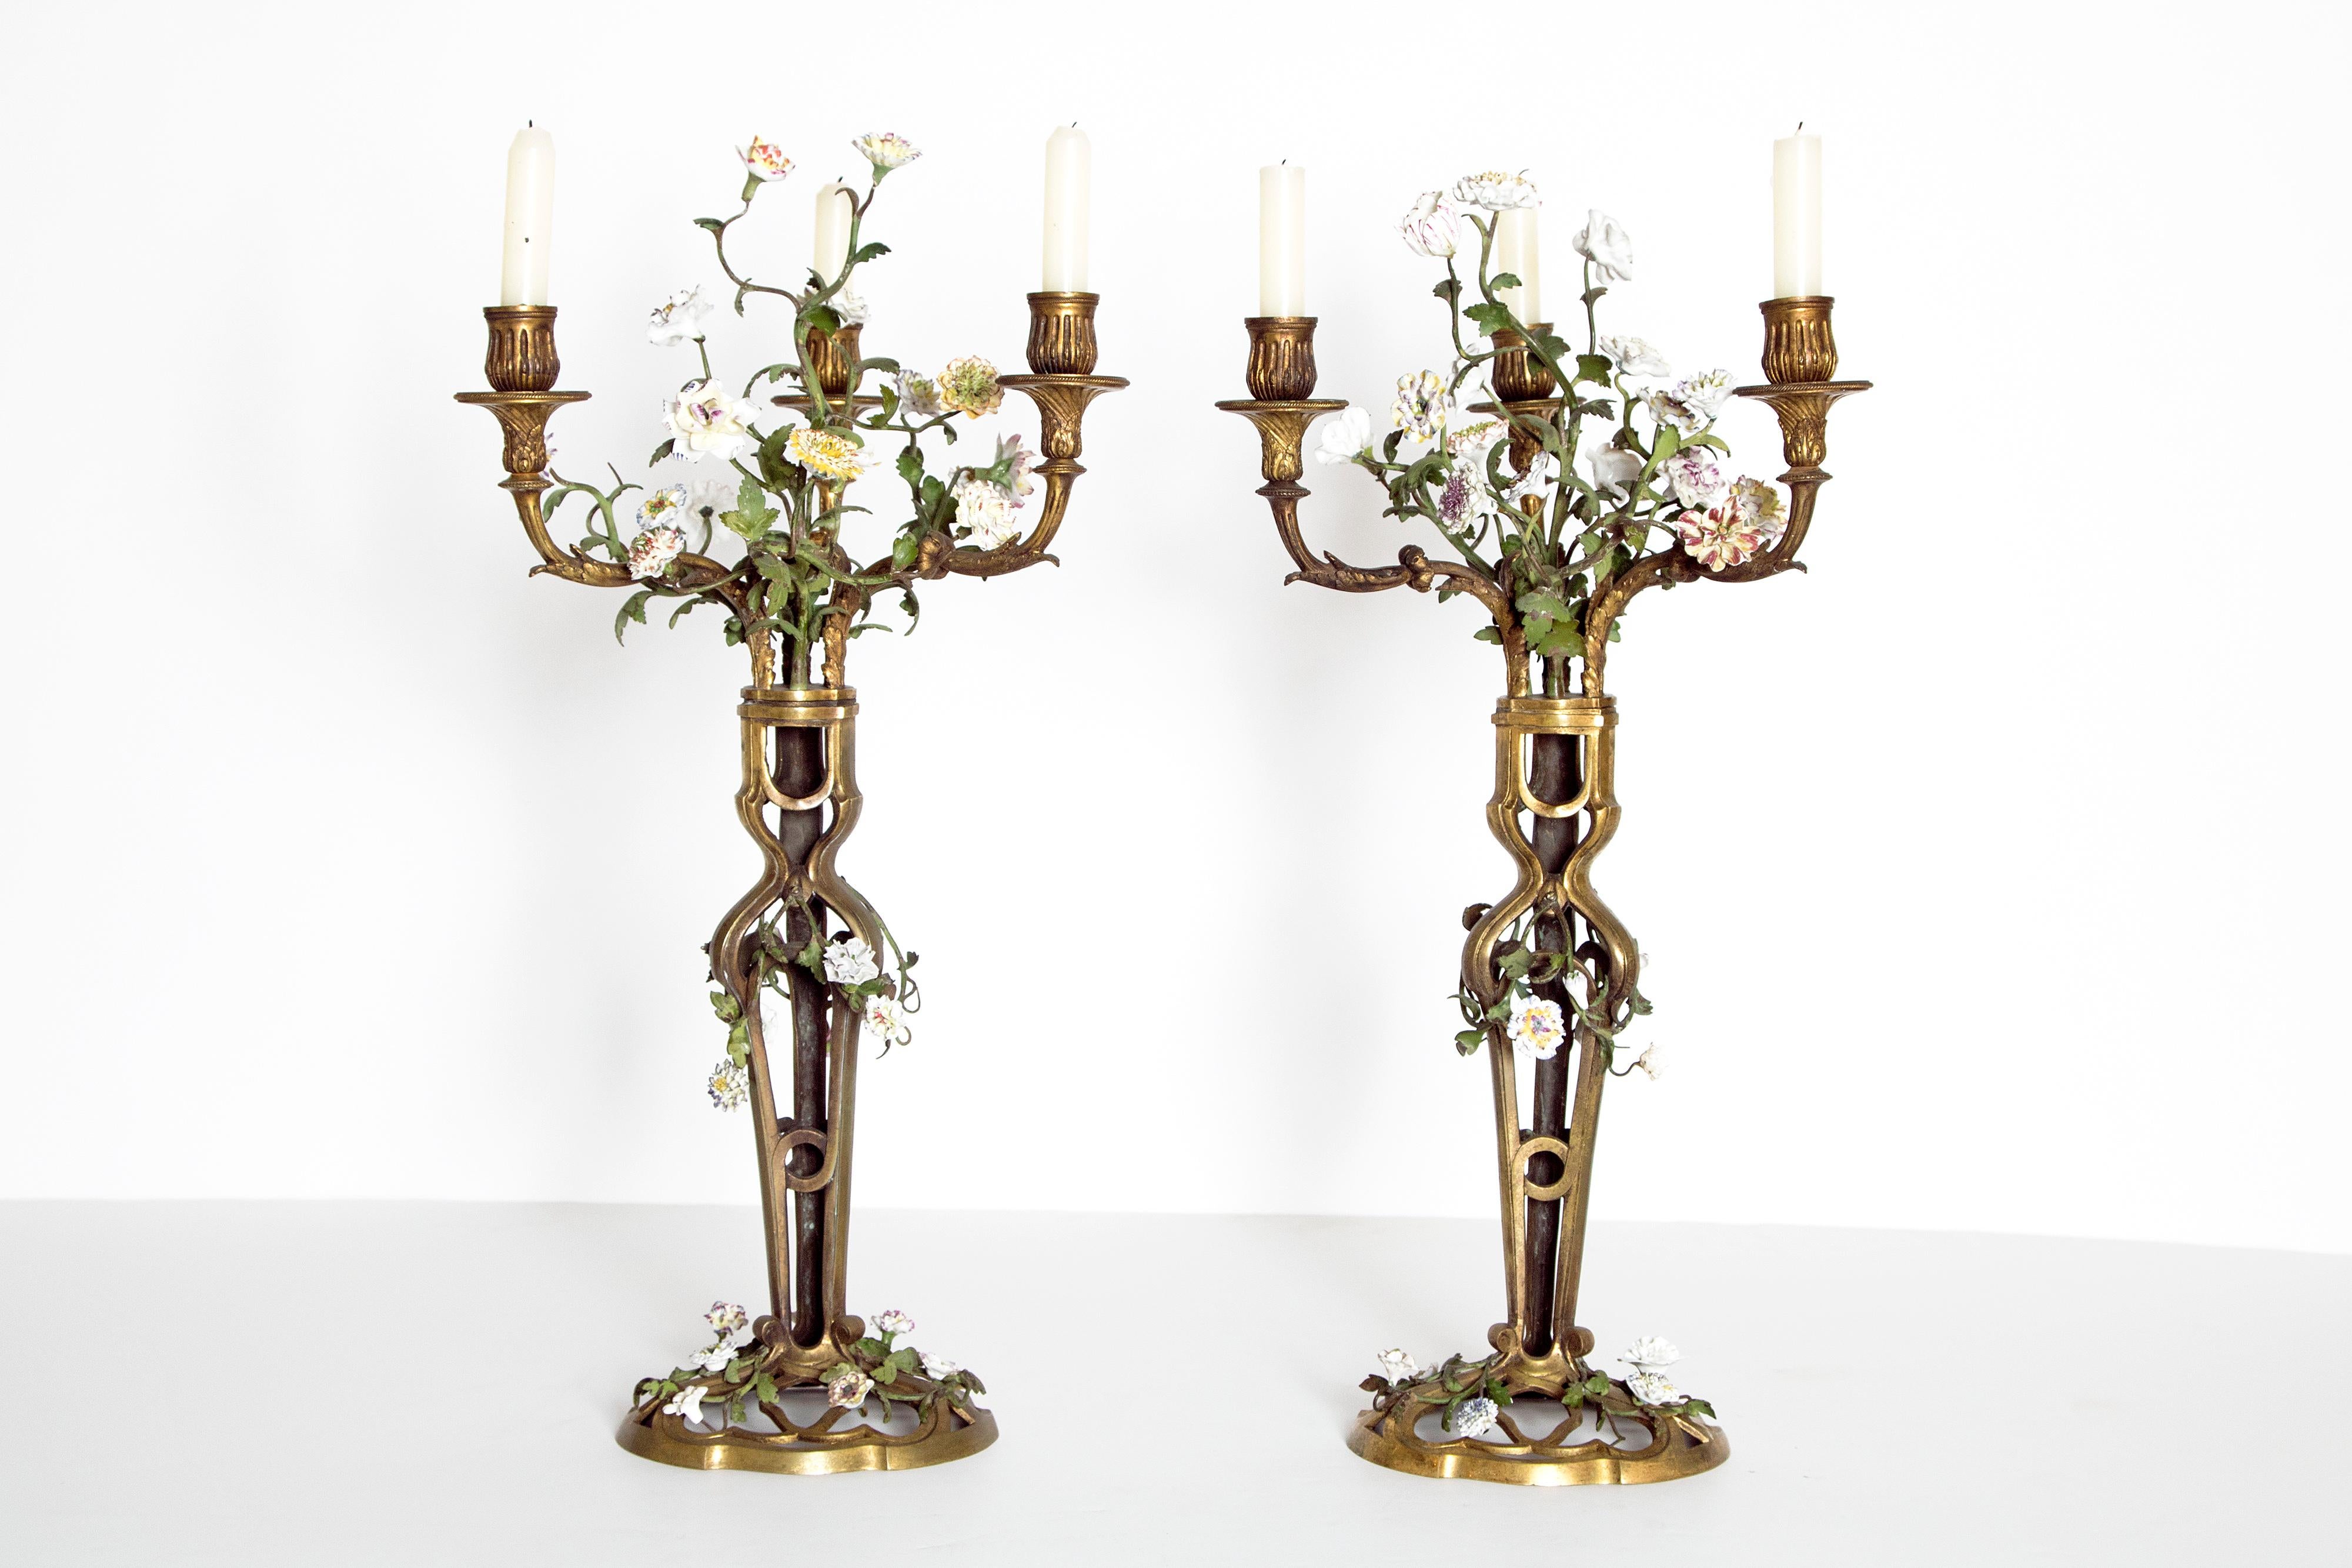 A whimsical pair of French gilt bronze candelabra with a filigree base and stems. Each candlestick has three arms. Applied overall bouquets of porcelain flowers on metal green stems with leaves. As found, late 19th century, France.